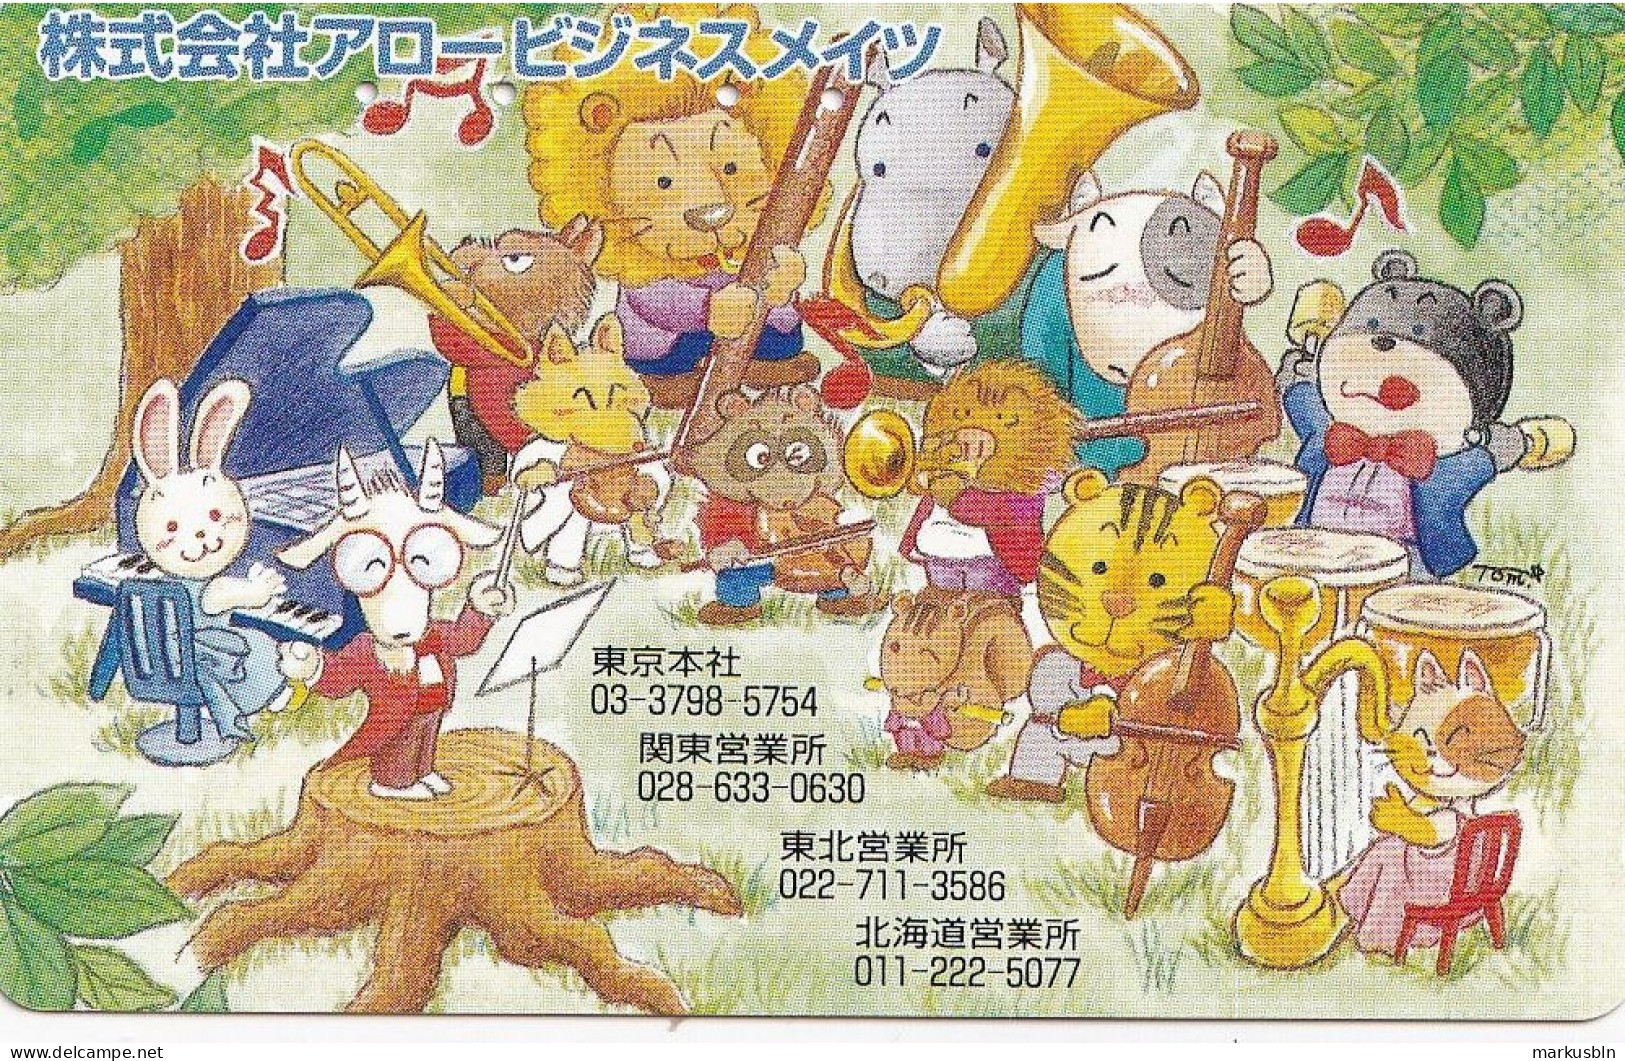 Japan Tamura 50u Old Private 110 - 016 Drawing Music Rabbit Racoon Tiger Hippo Lion Orchestra - Giappone